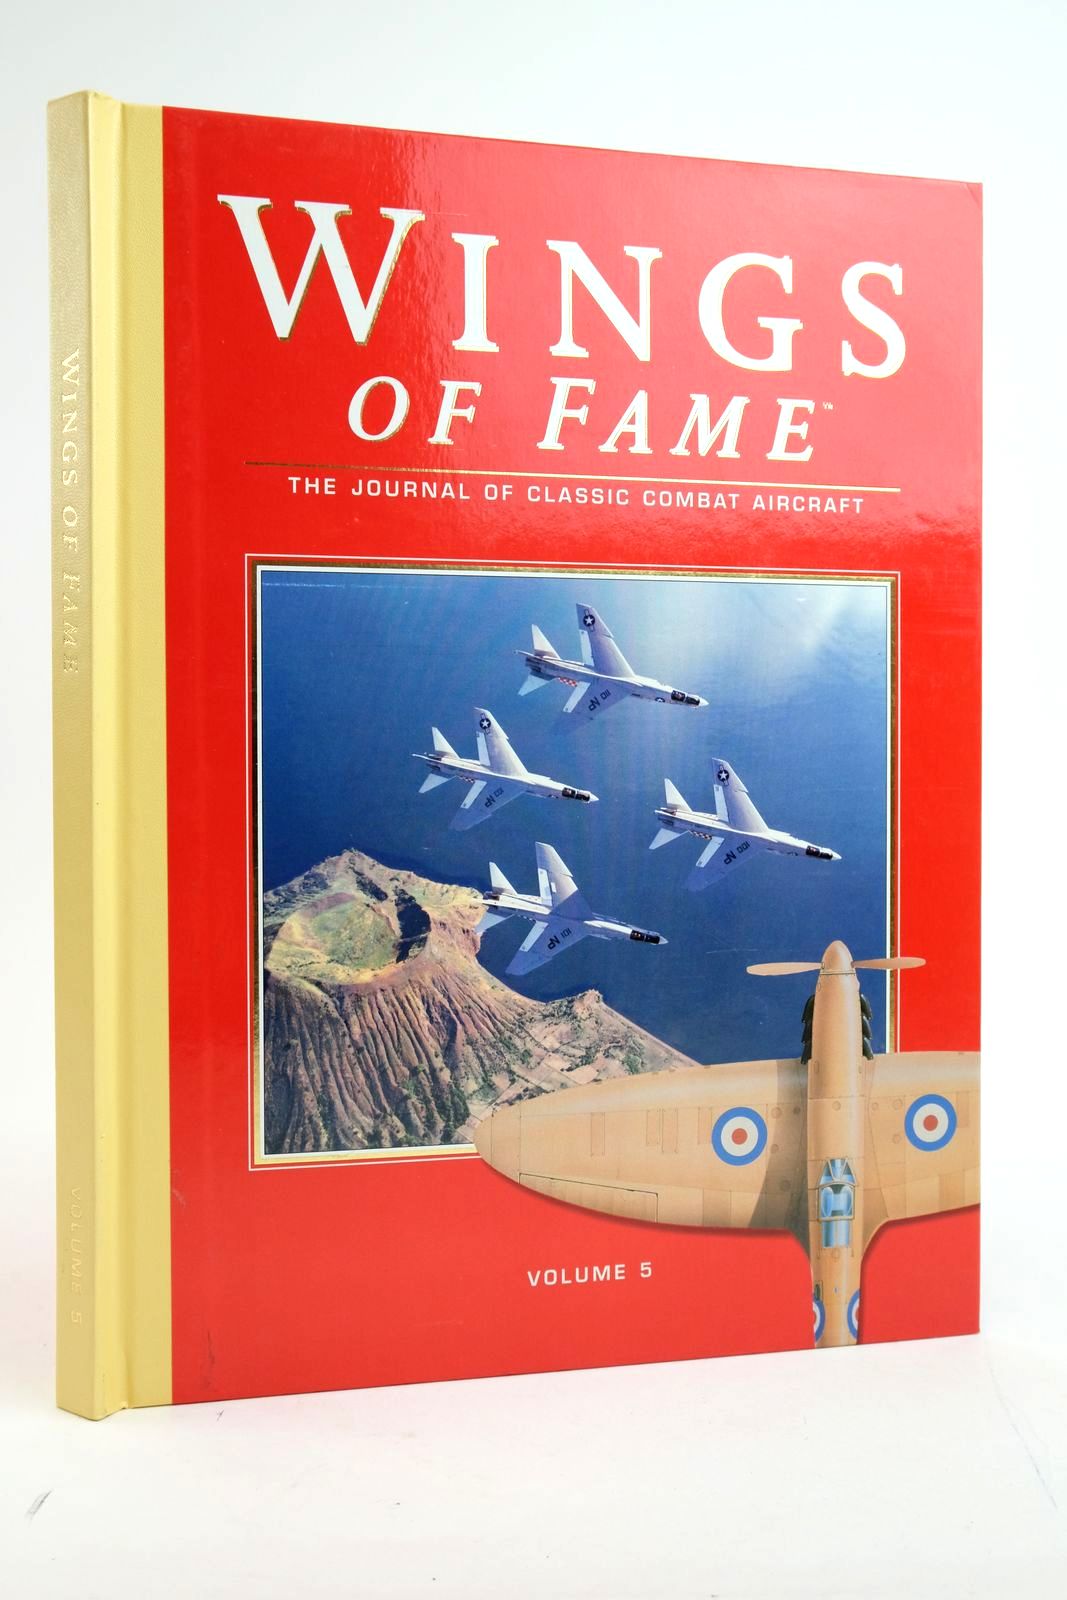 Photo of WINGS OF FAME VOLUME 5 published by Aerospace (STOCK CODE: 2135117)  for sale by Stella & Rose's Books